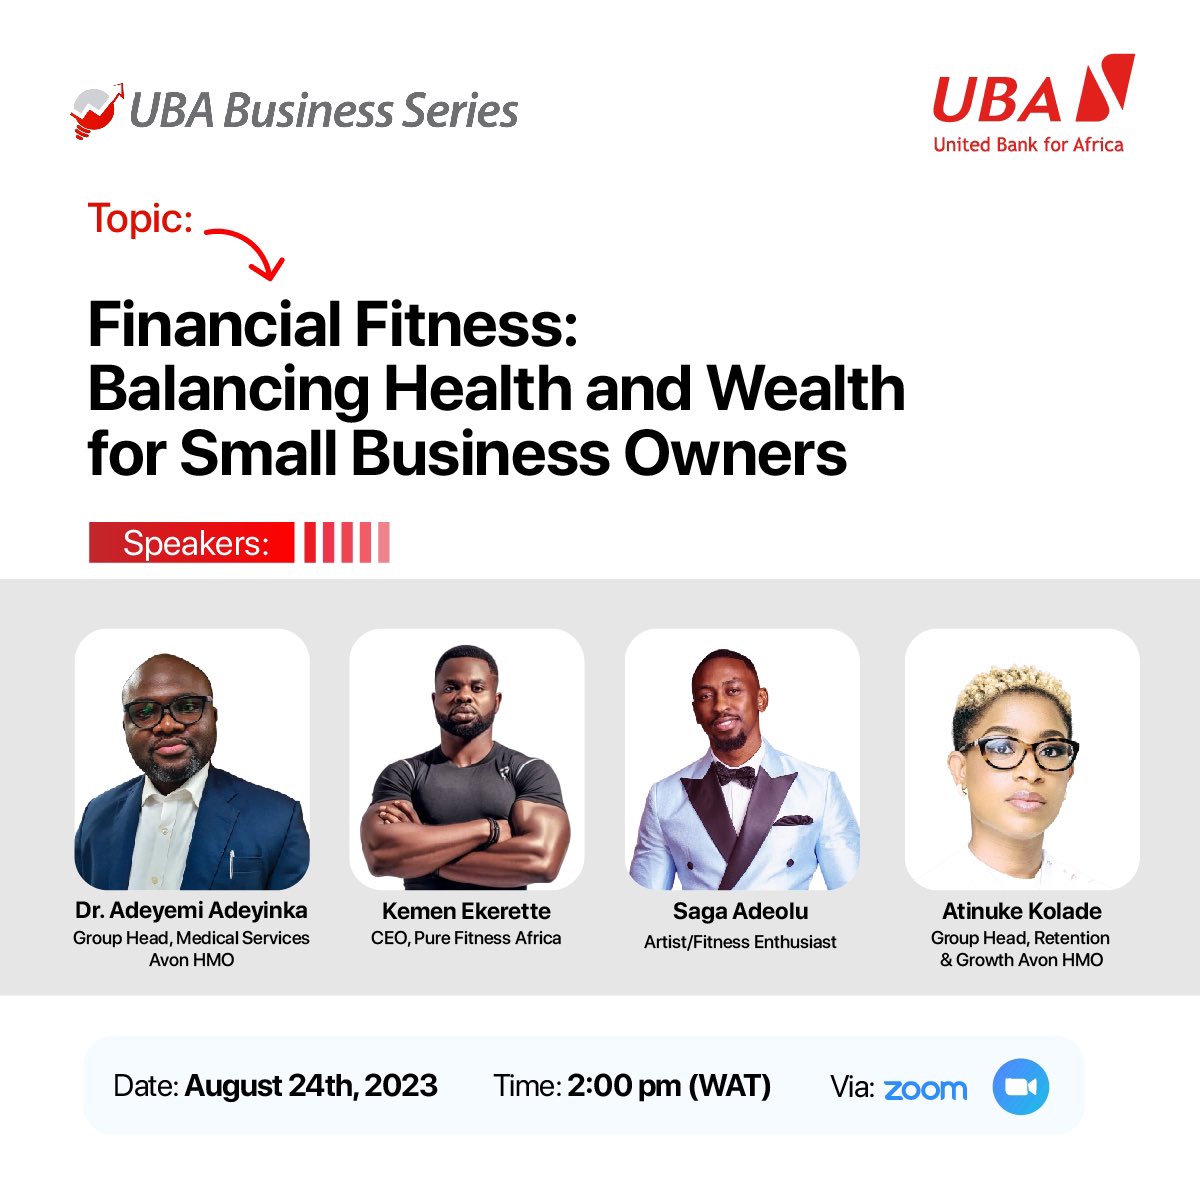 The UBA Business Series will be equipping SMEs with necessary skills for growth and sustainability. The series would be there to provide insights on best practices for running successful businesses while keeping your health in check in these challenging times. All for FREE!